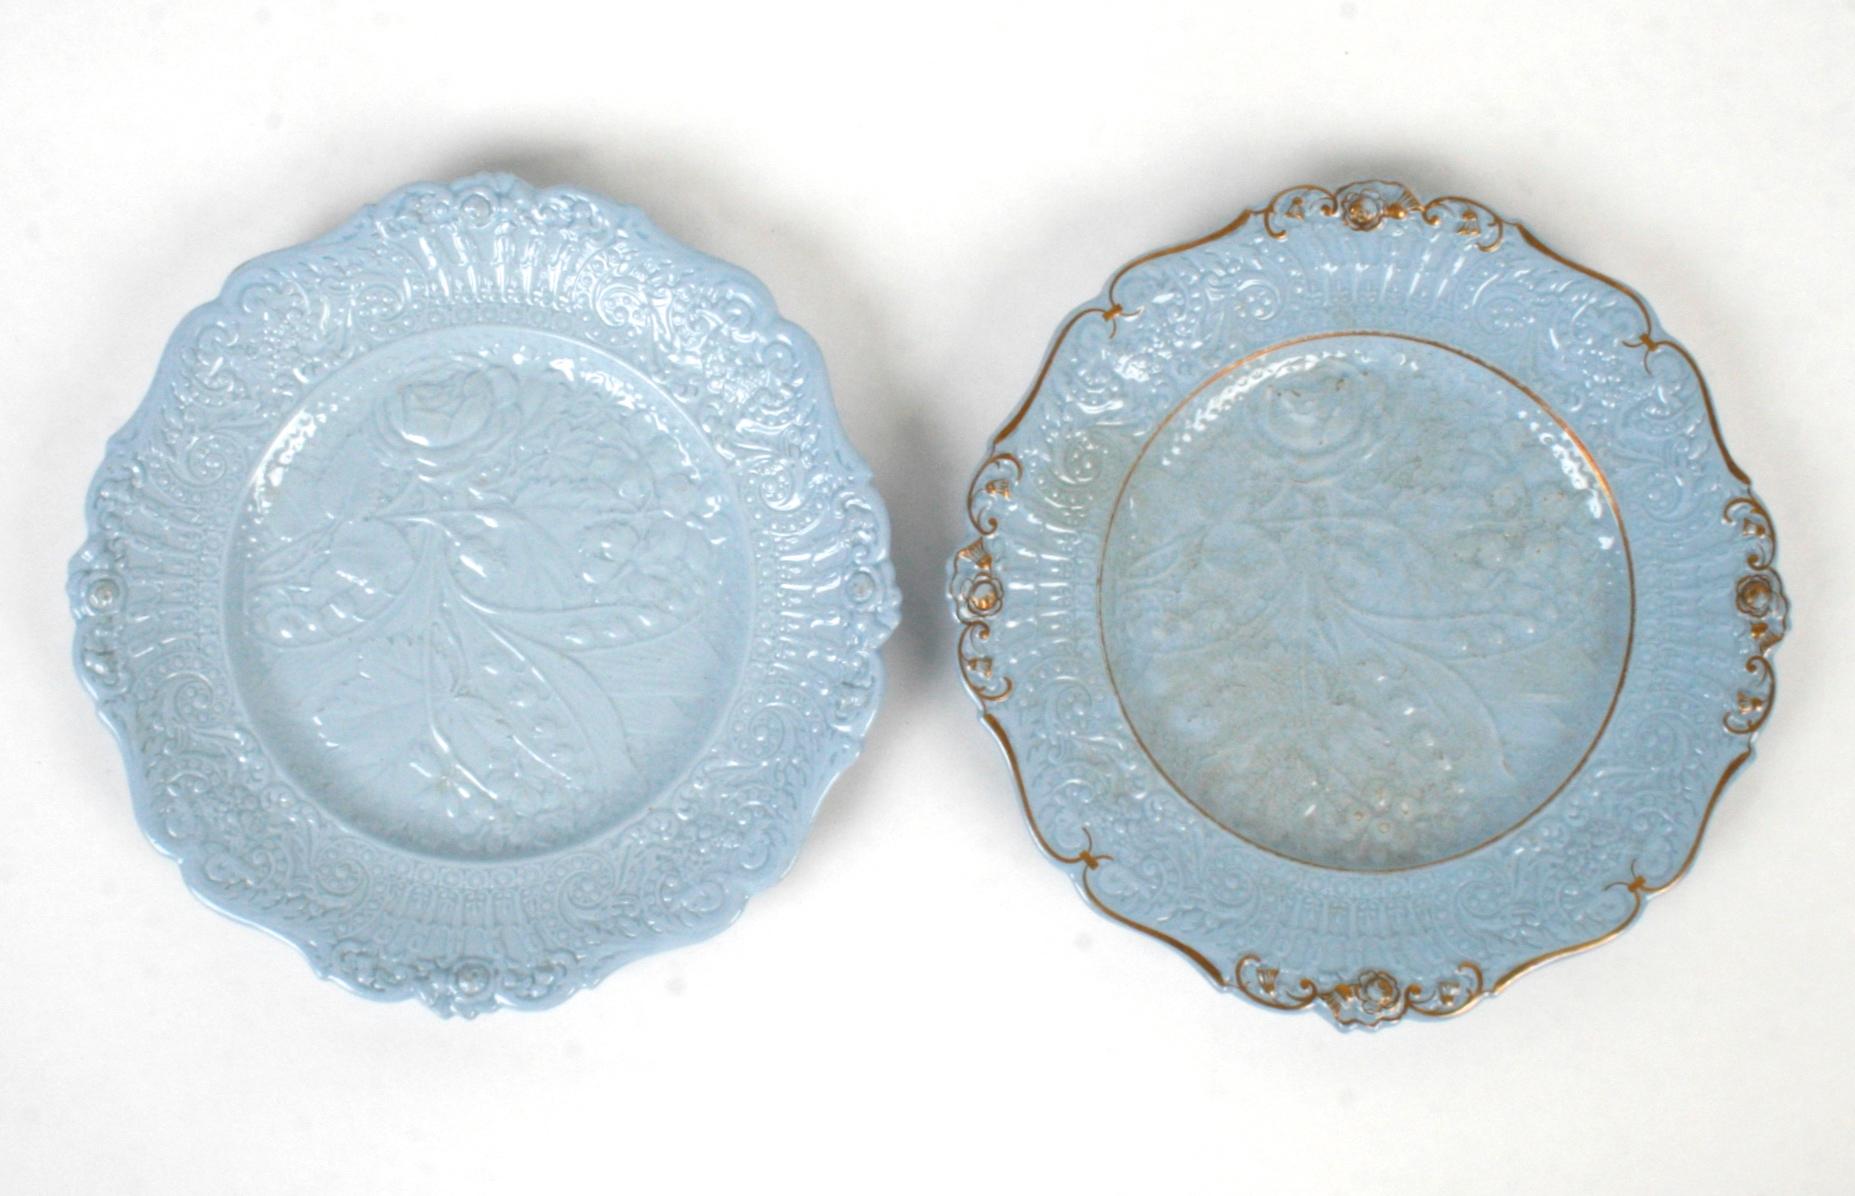 A 23 piece set of blue relief moulded Staffordshire stoneware by William Ridgway & Co. The company made stoneware in Staffordshire England from 1814-1847. Relief moulded, smear-glazed stoneware was a popular material for domestic items throughout